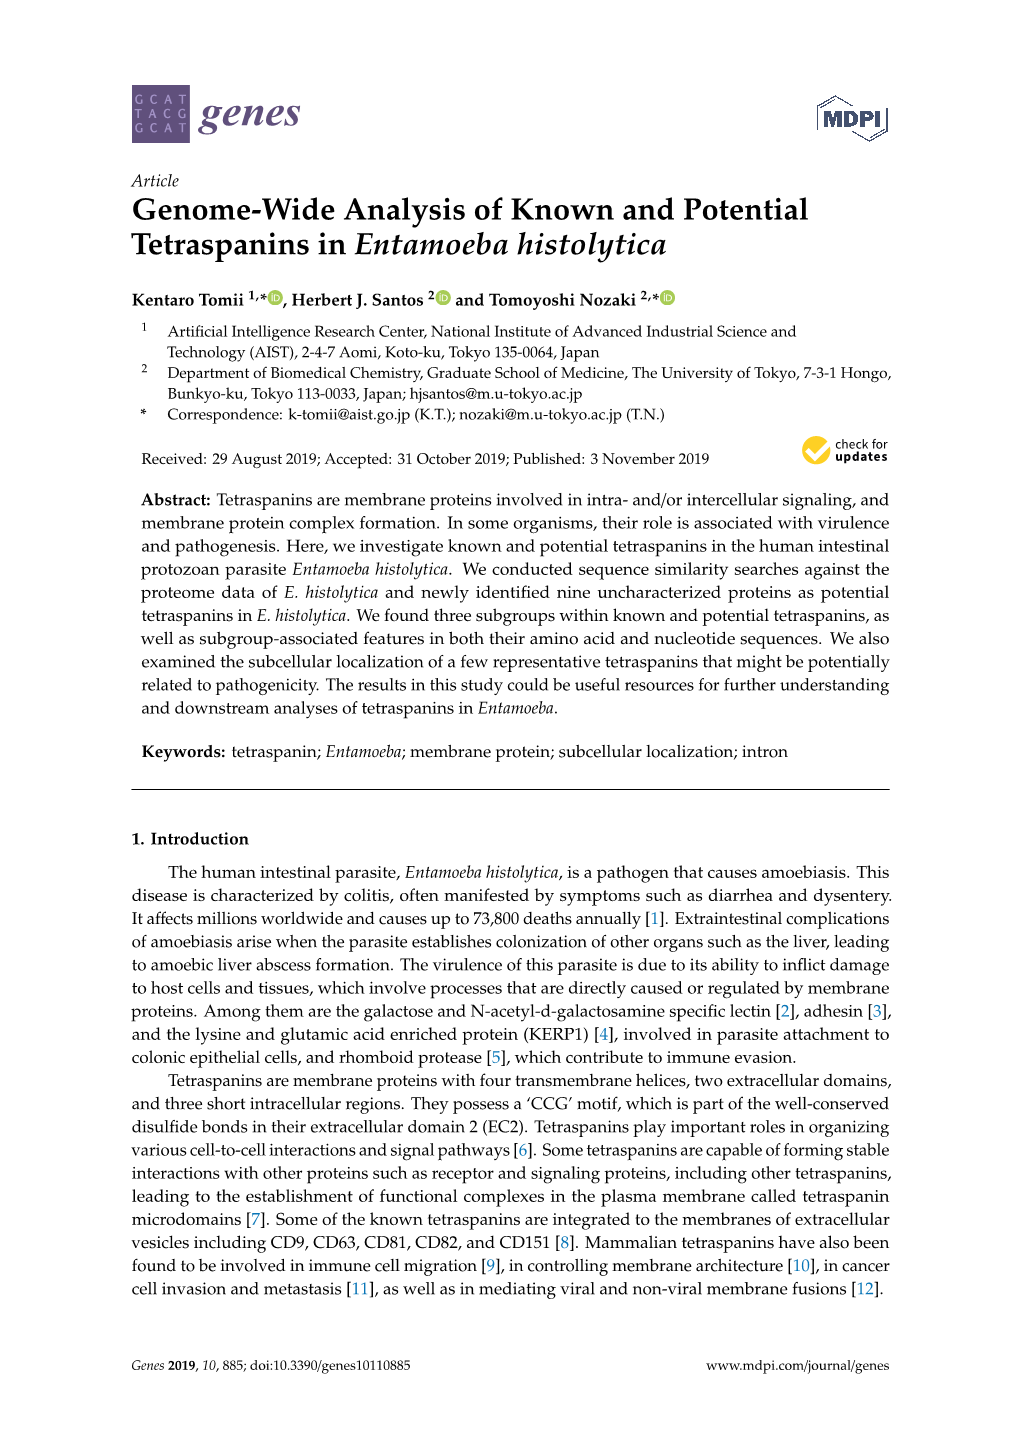 Genome-Wide Analysis of Known and Potential Tetraspanins in Entamoeba Histolytica